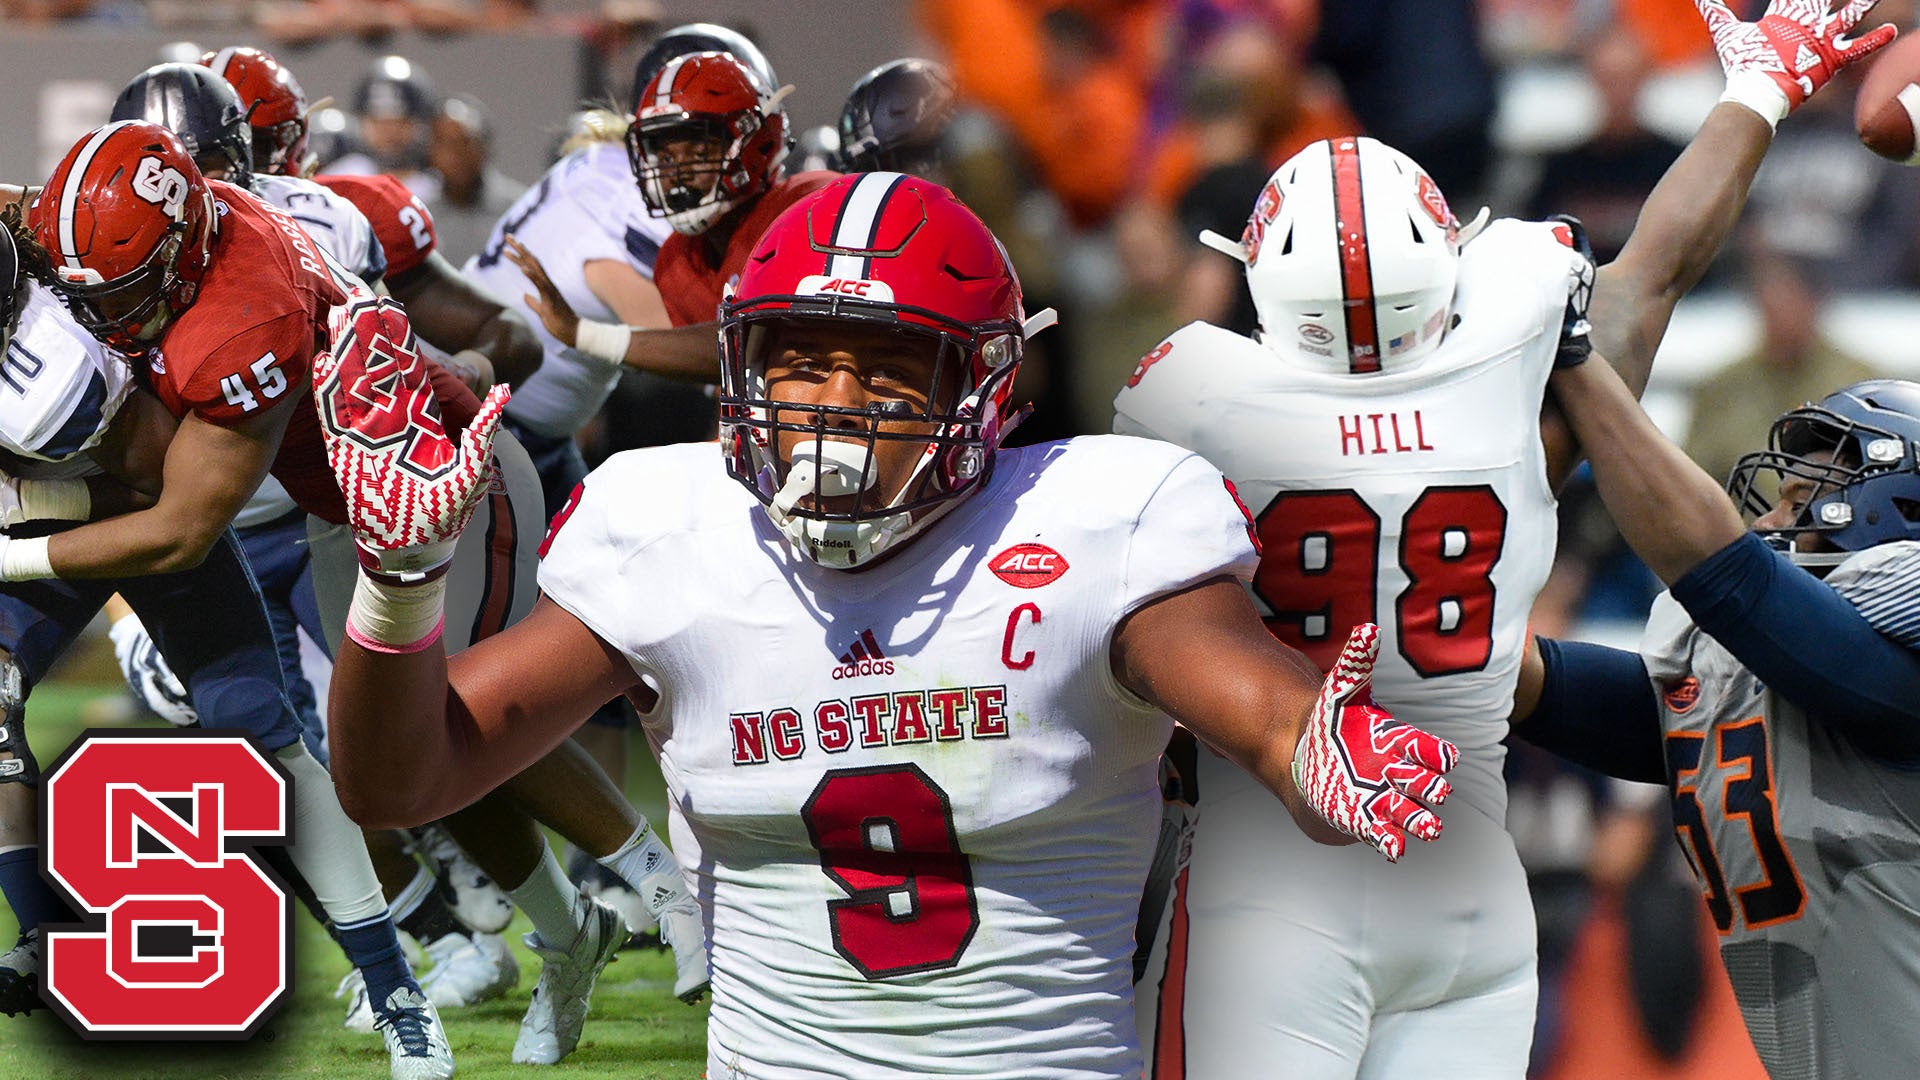 NC State returns home as a 3-point underdog to Louisville - Backing The Pack